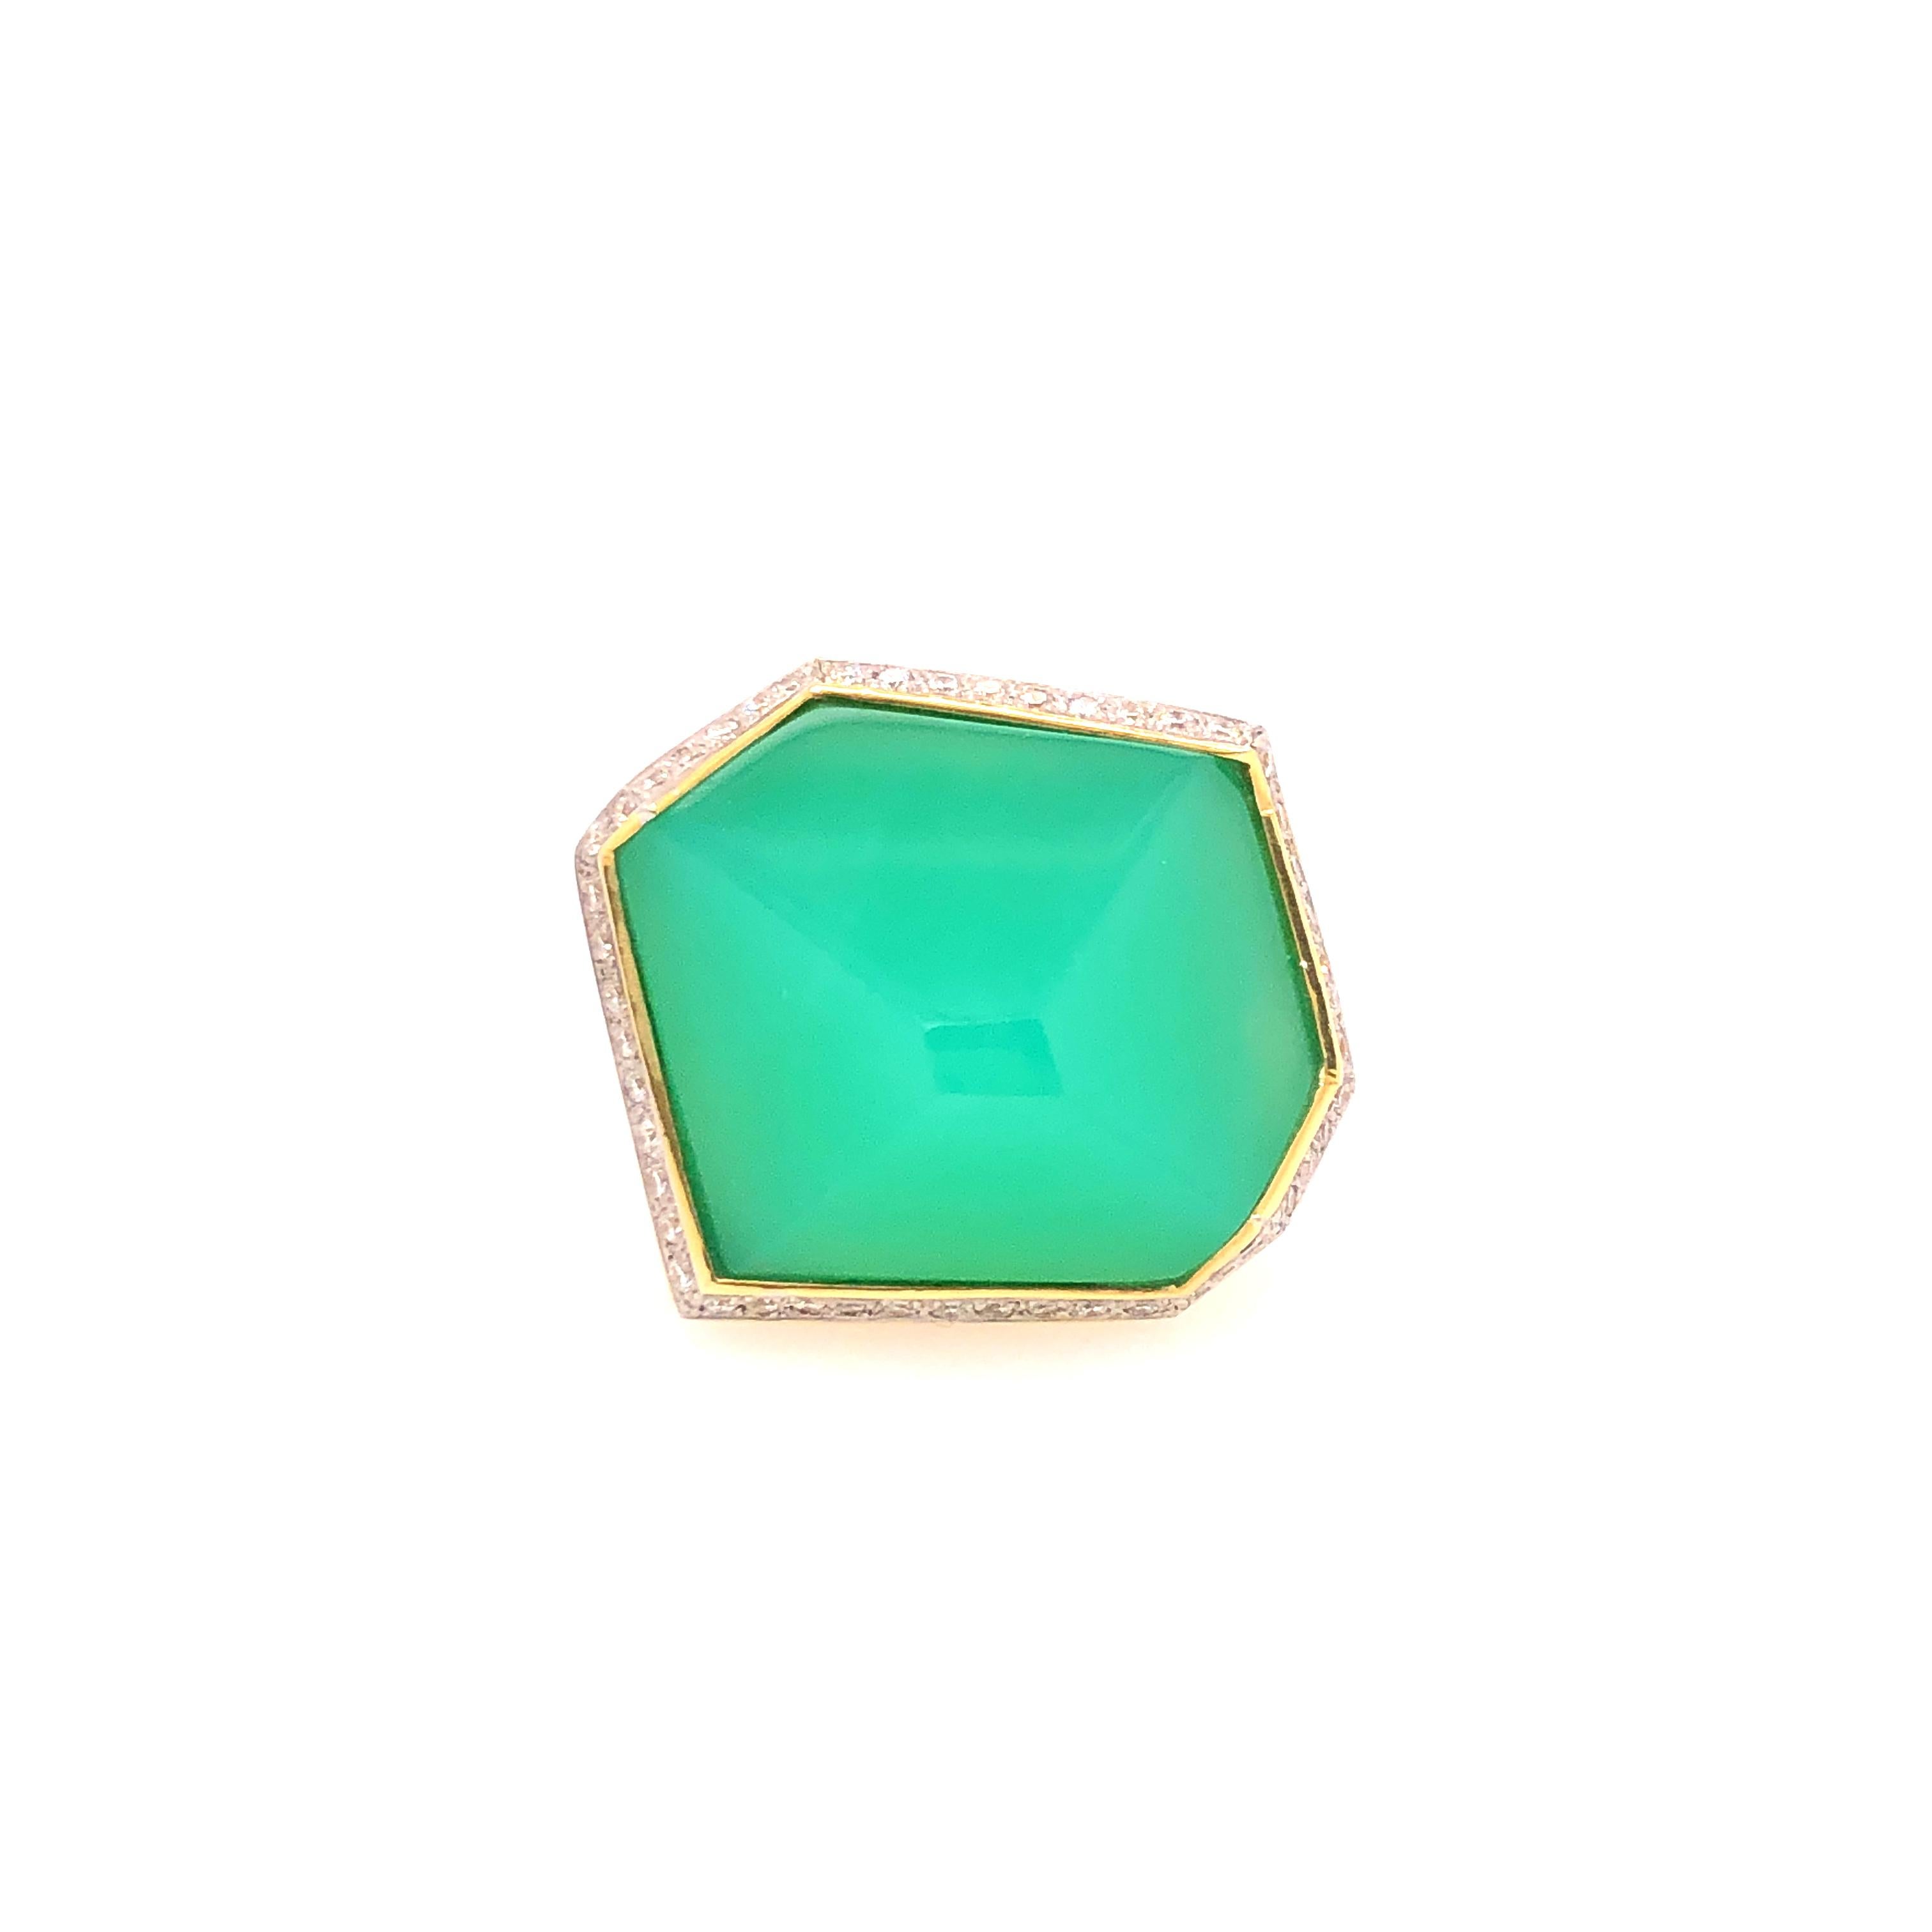 Extraordinary, Valerie Naifeh's 17.36 CT Green Chrysoprase Diamond ring is only for those looking to stand out! The large irregular shape Chrysoprase is bezel set into the 18K yellow gold ring with a border of diamonds outlining it.

Valerie Naifeh